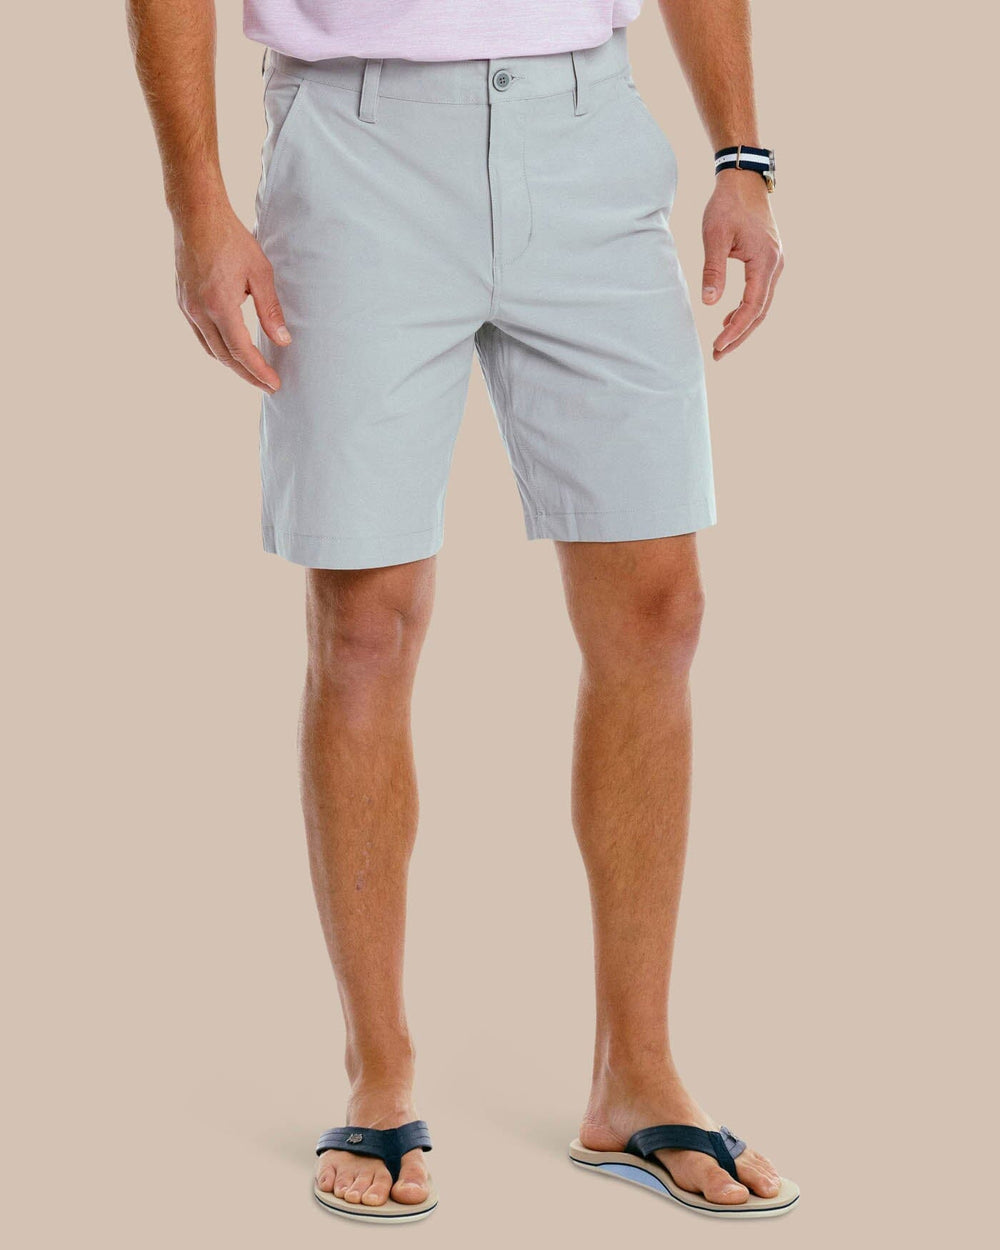 The front of the Men's T3 Gulf 9 Inch Performance Short by Southern Tide - Seagull Grey